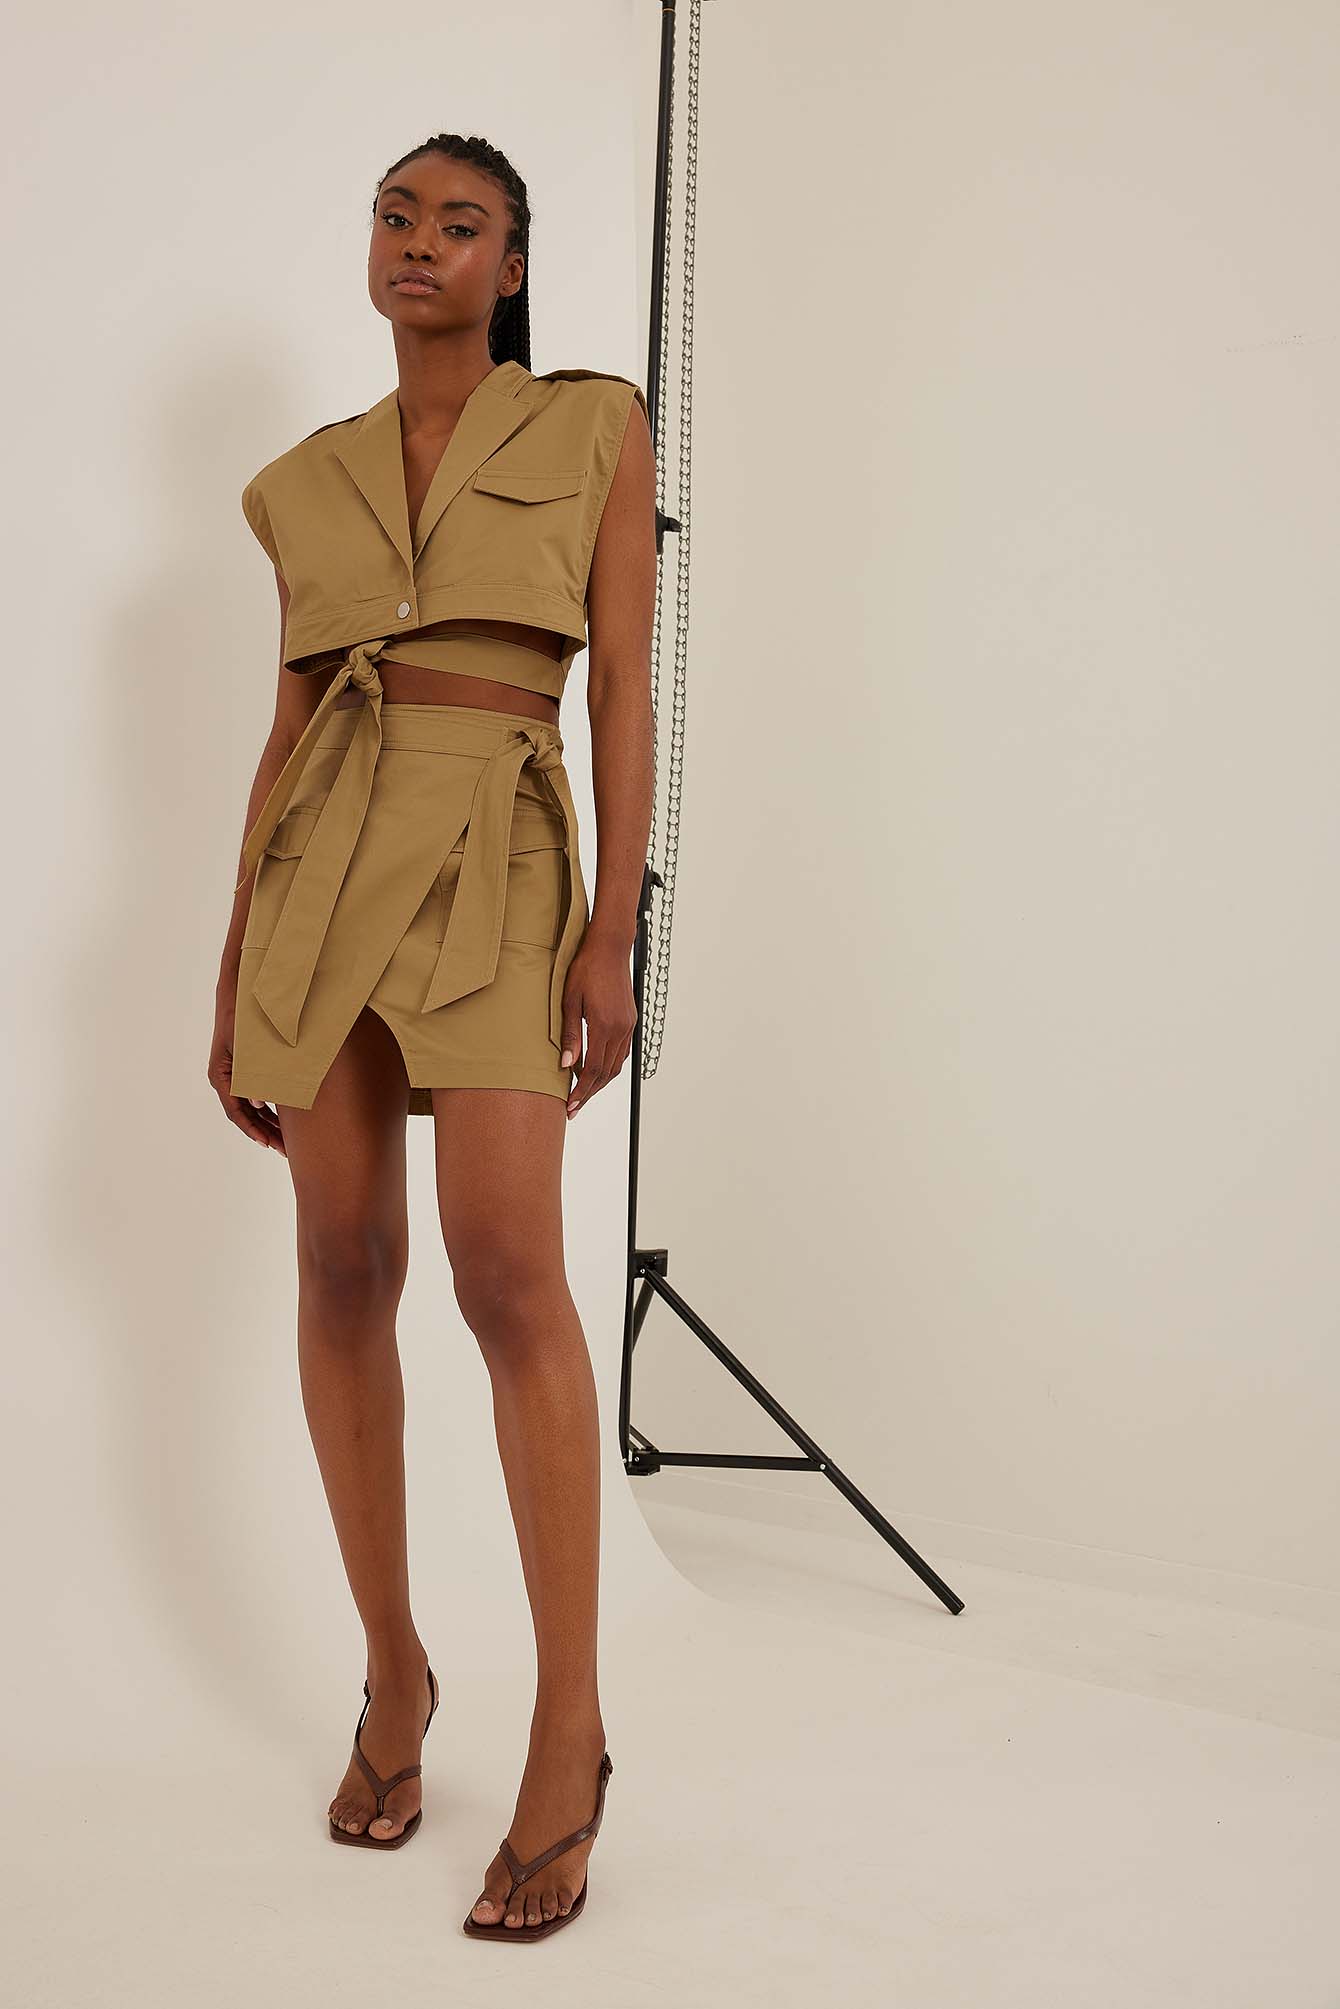 Angelica Blick X Na-kd Wrapped Trench Skirt - Beige